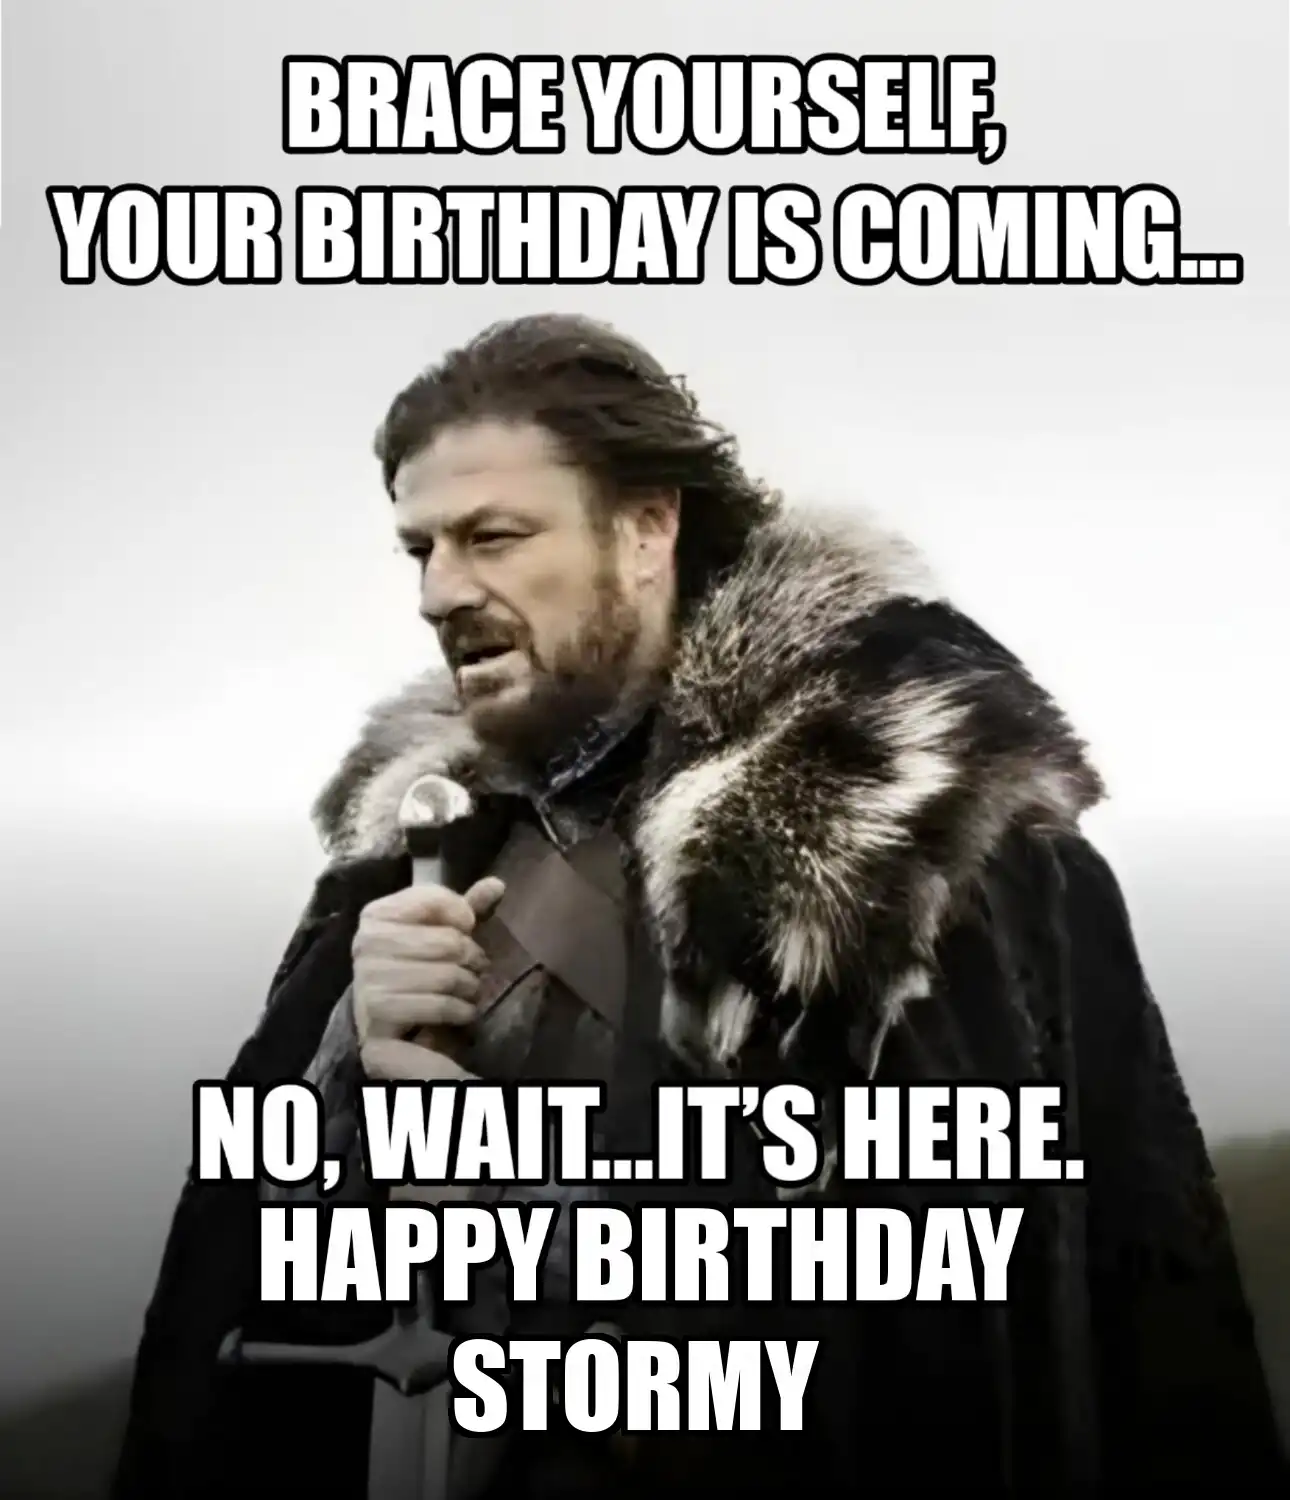 Happy Birthday Stormy Brace Yourself Your Birthday Is Coming Meme